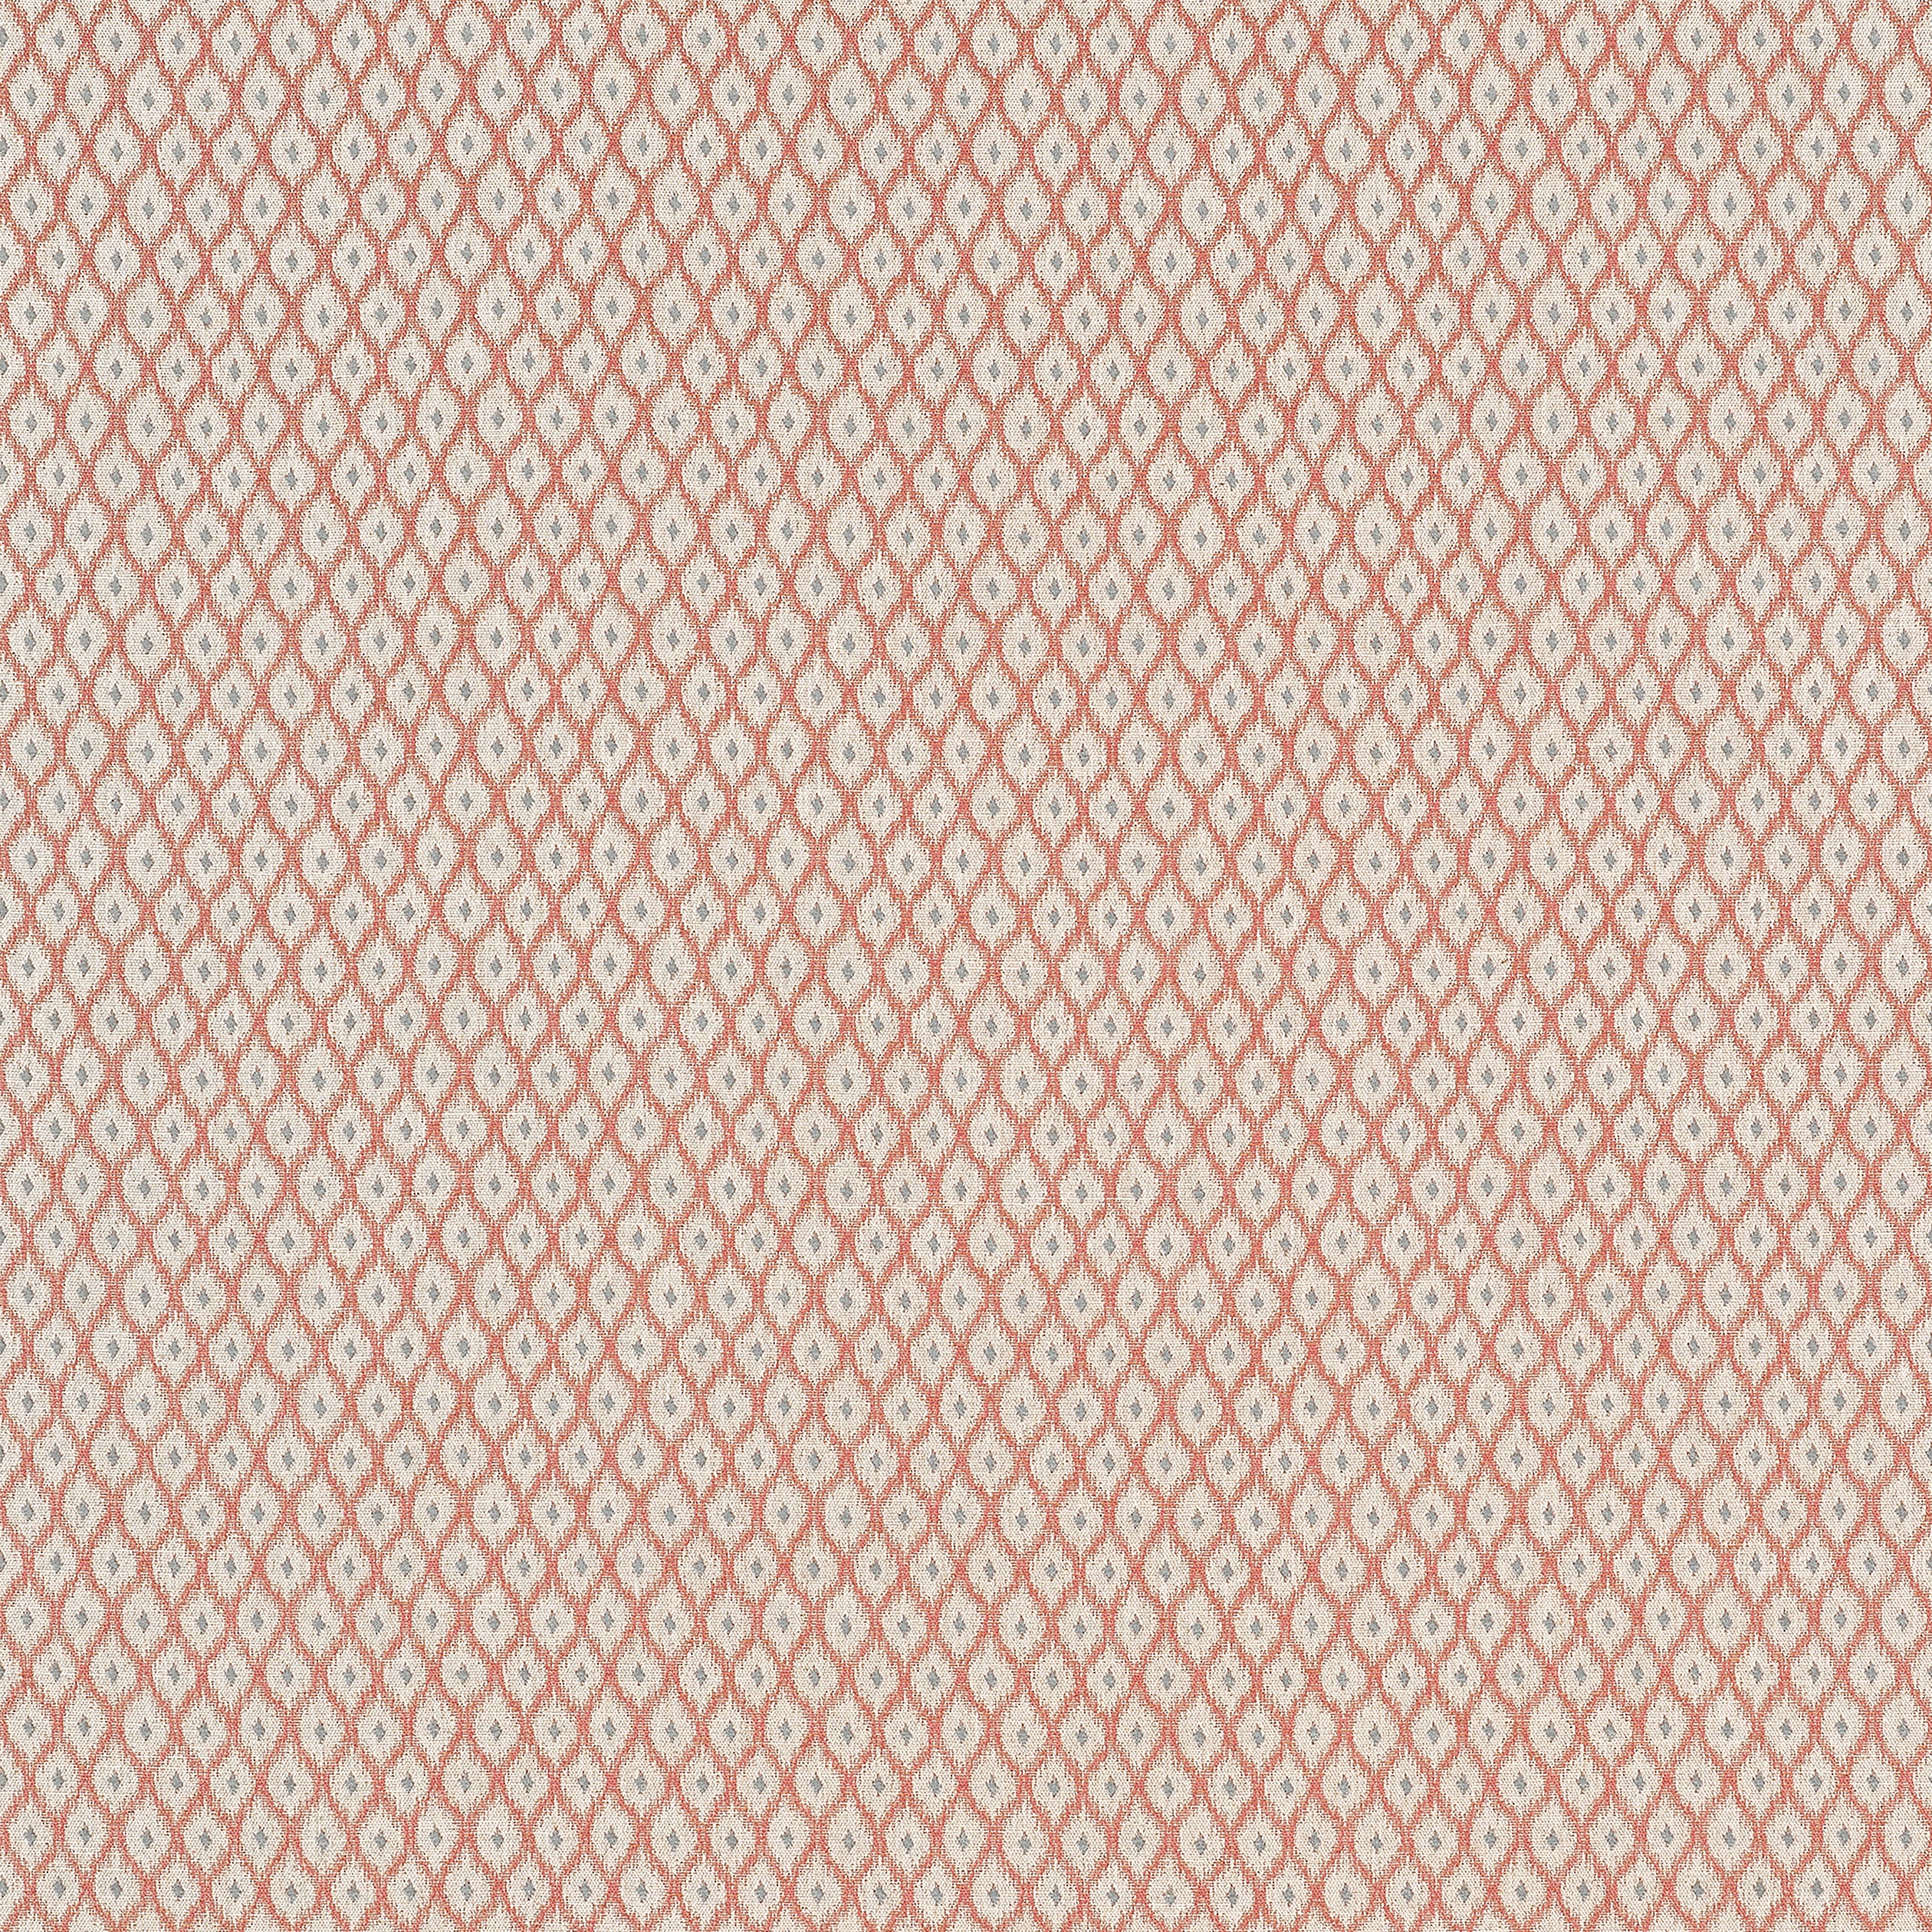 Josephine fabric in persimmon color - pattern number W81900 - by Thibaut in the Companions collection